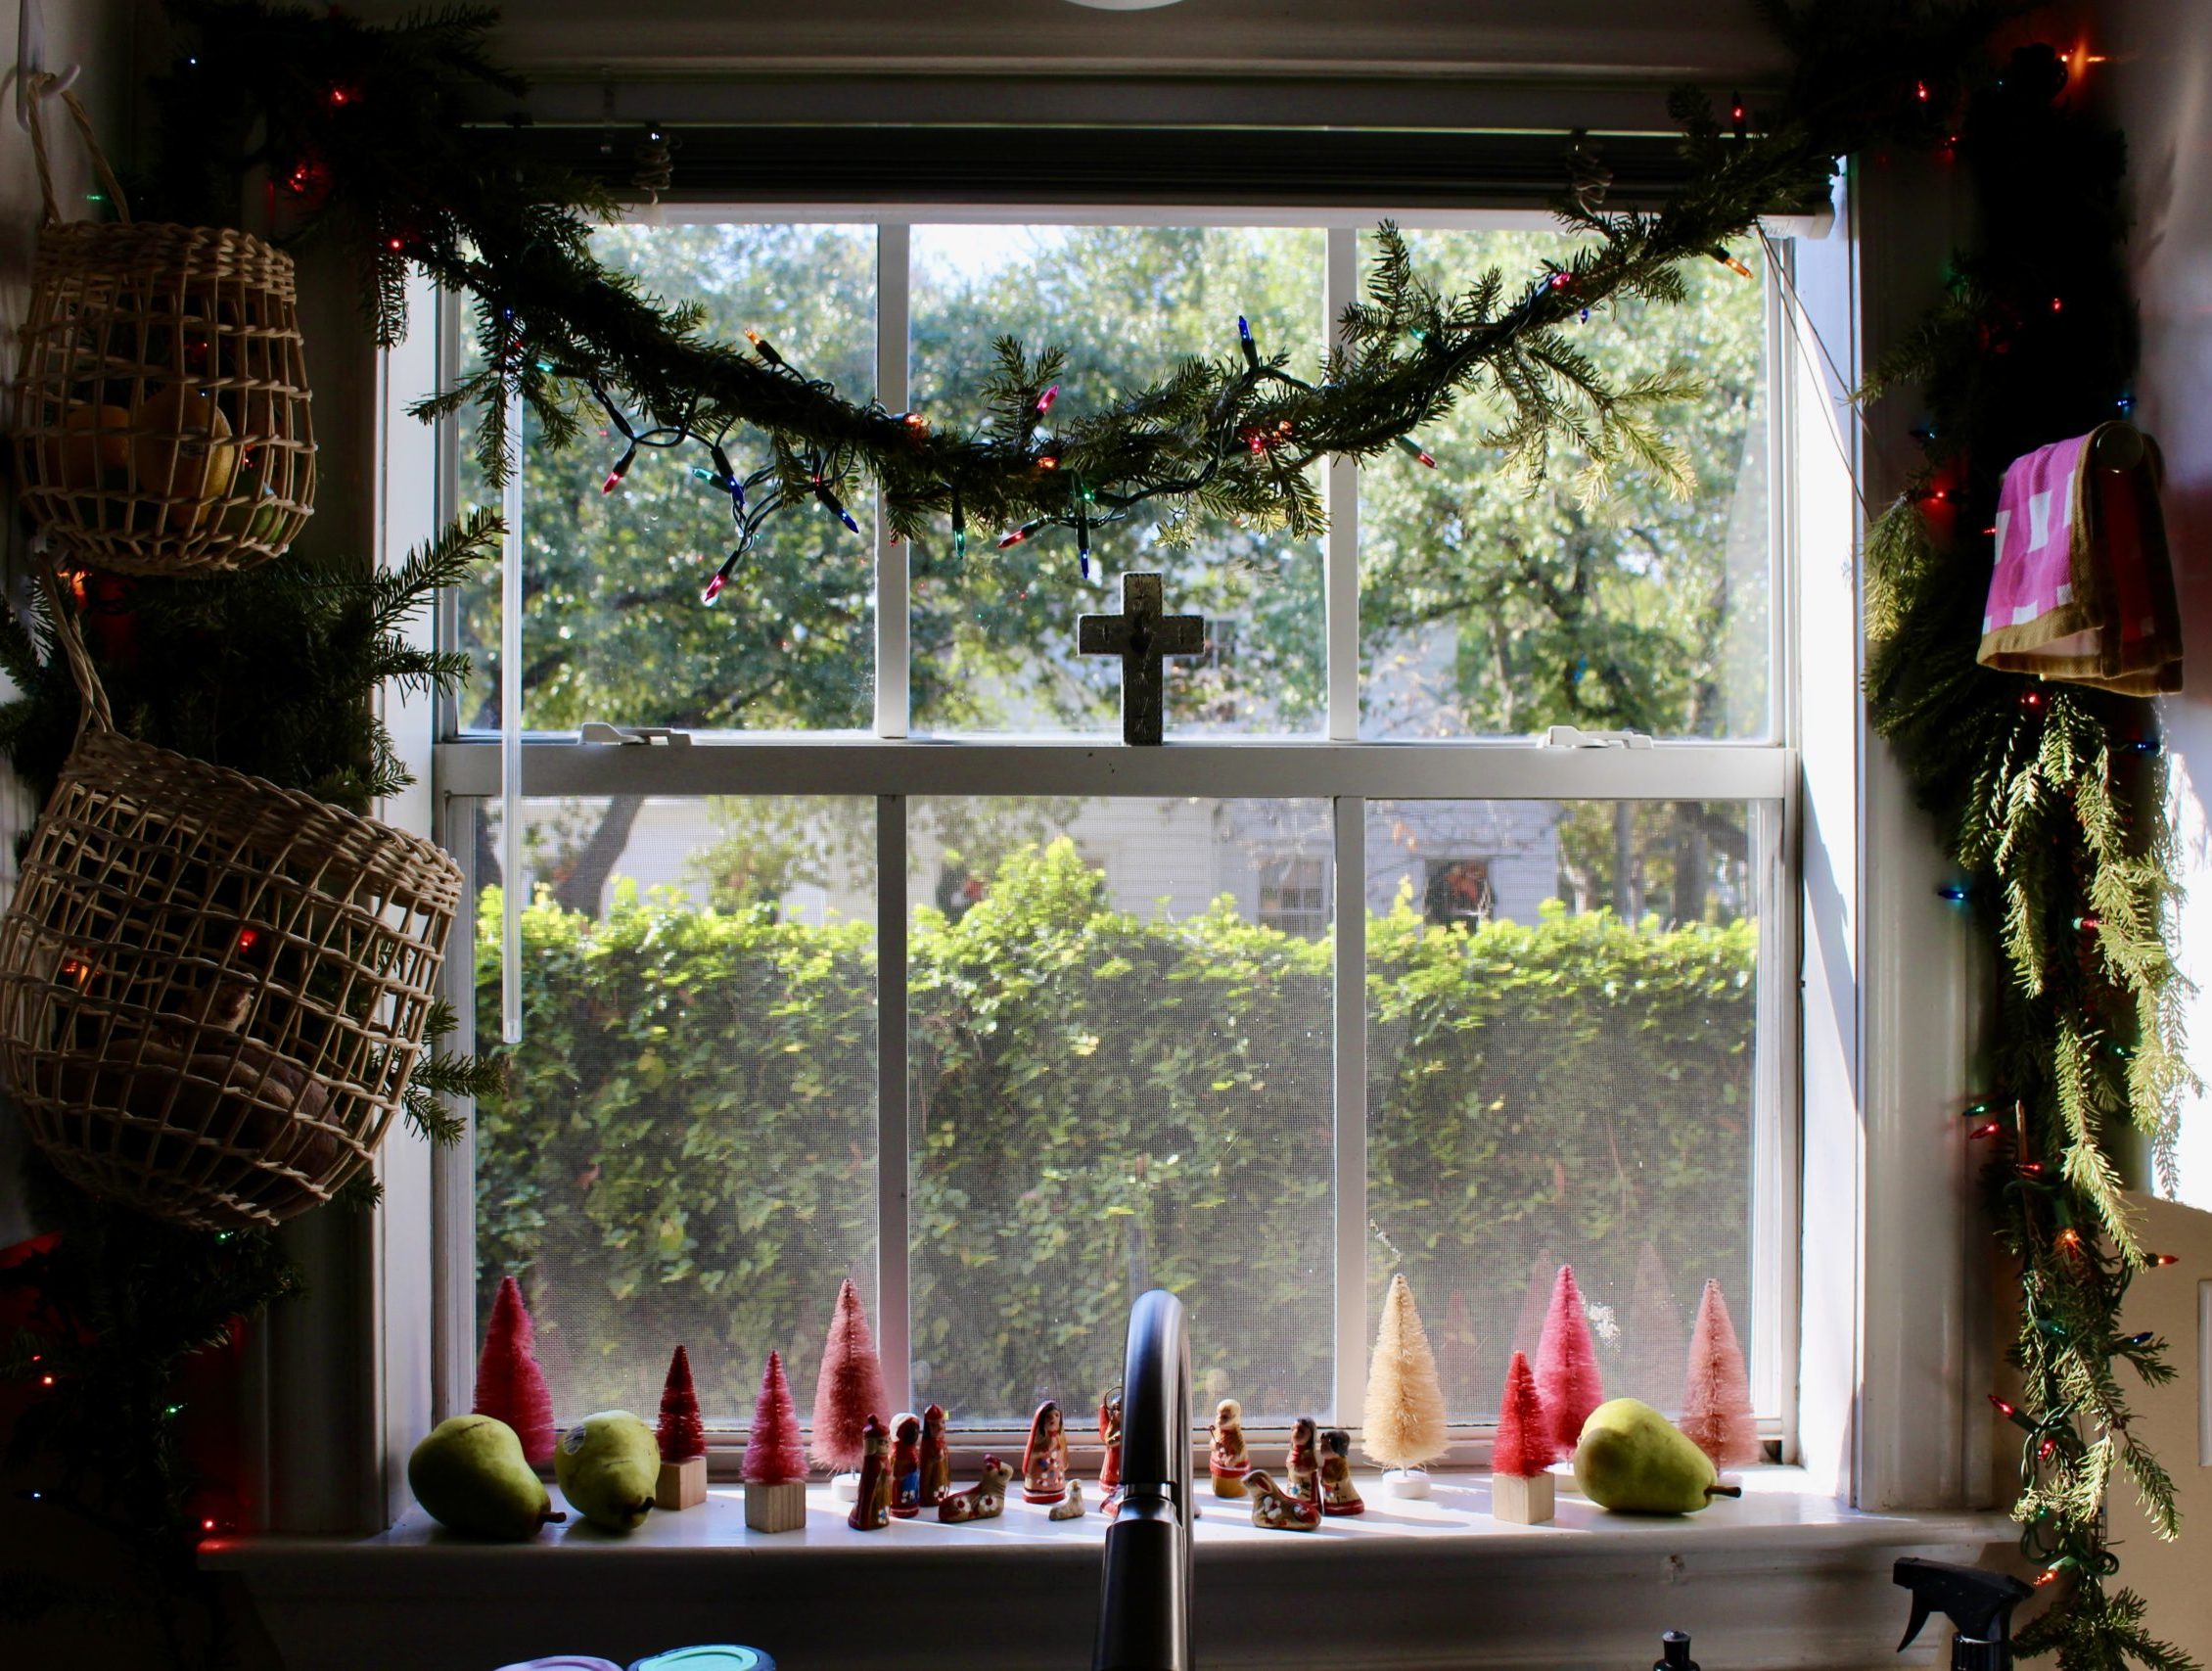 Christmas decorations in the kitchen window